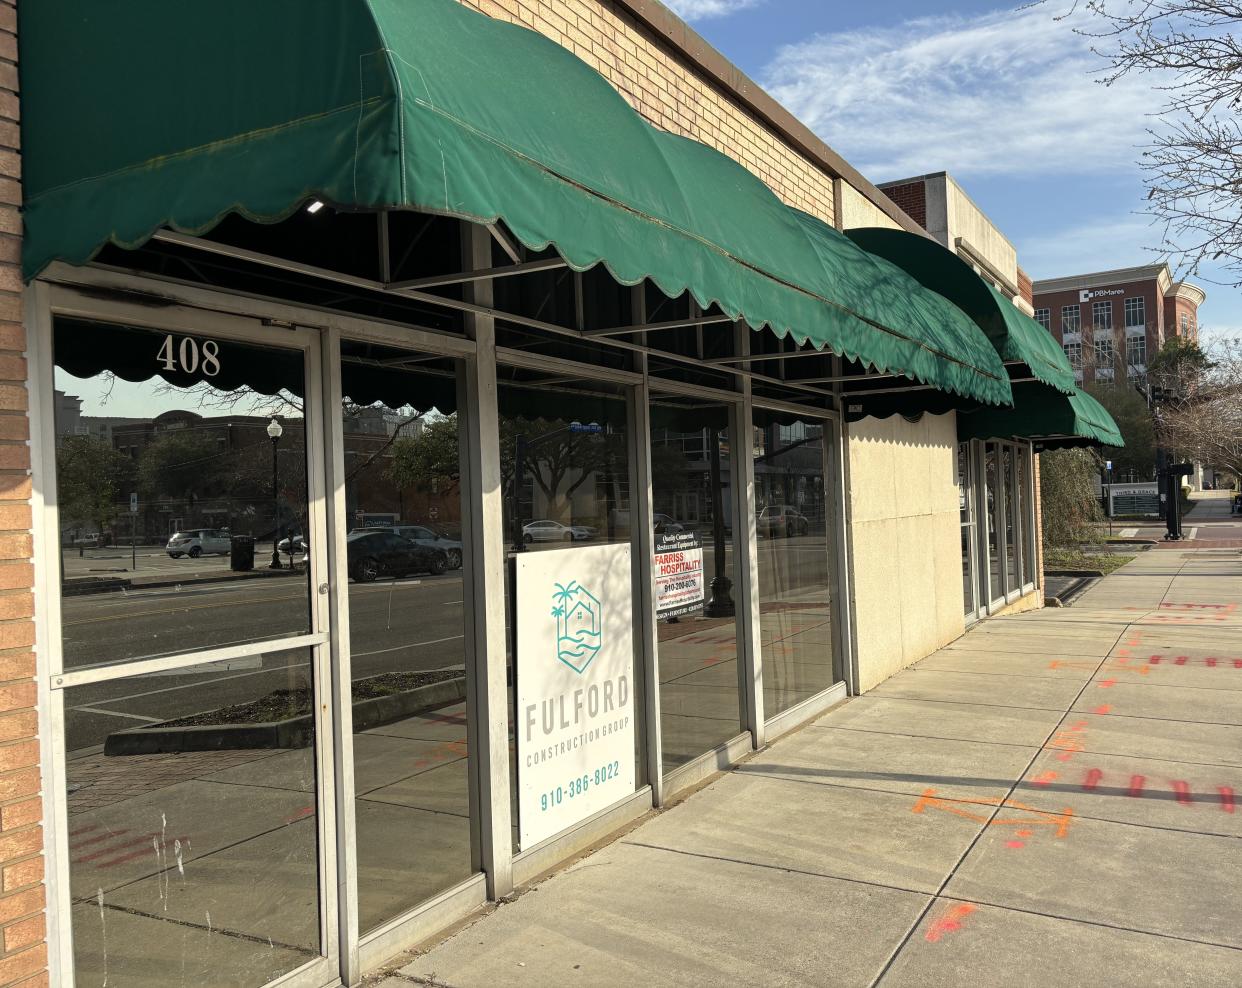 A new venture in the works at 406 and 408 N. Third St. in Wilmington, N.C. is set to be an office site and test kitchen for Shuckin' Shack Oyster Bar, and offer space for food trucks and more.